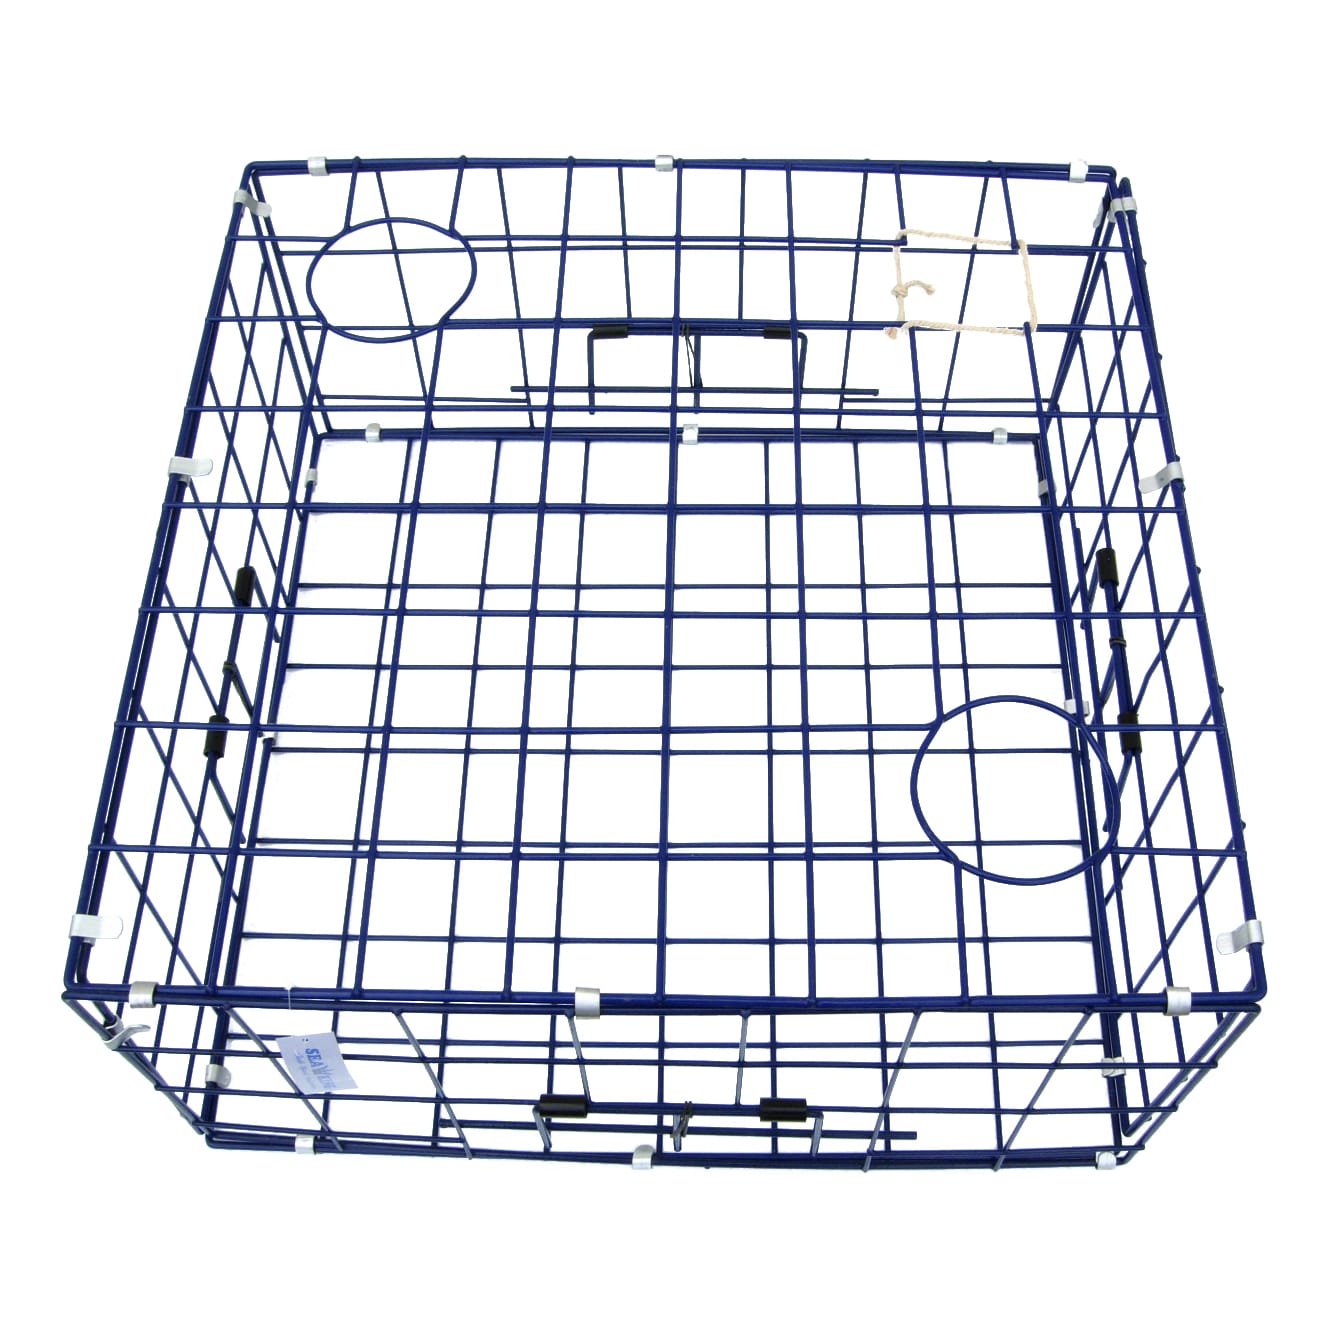 Danielson® Deluxe FTC Crab Trap